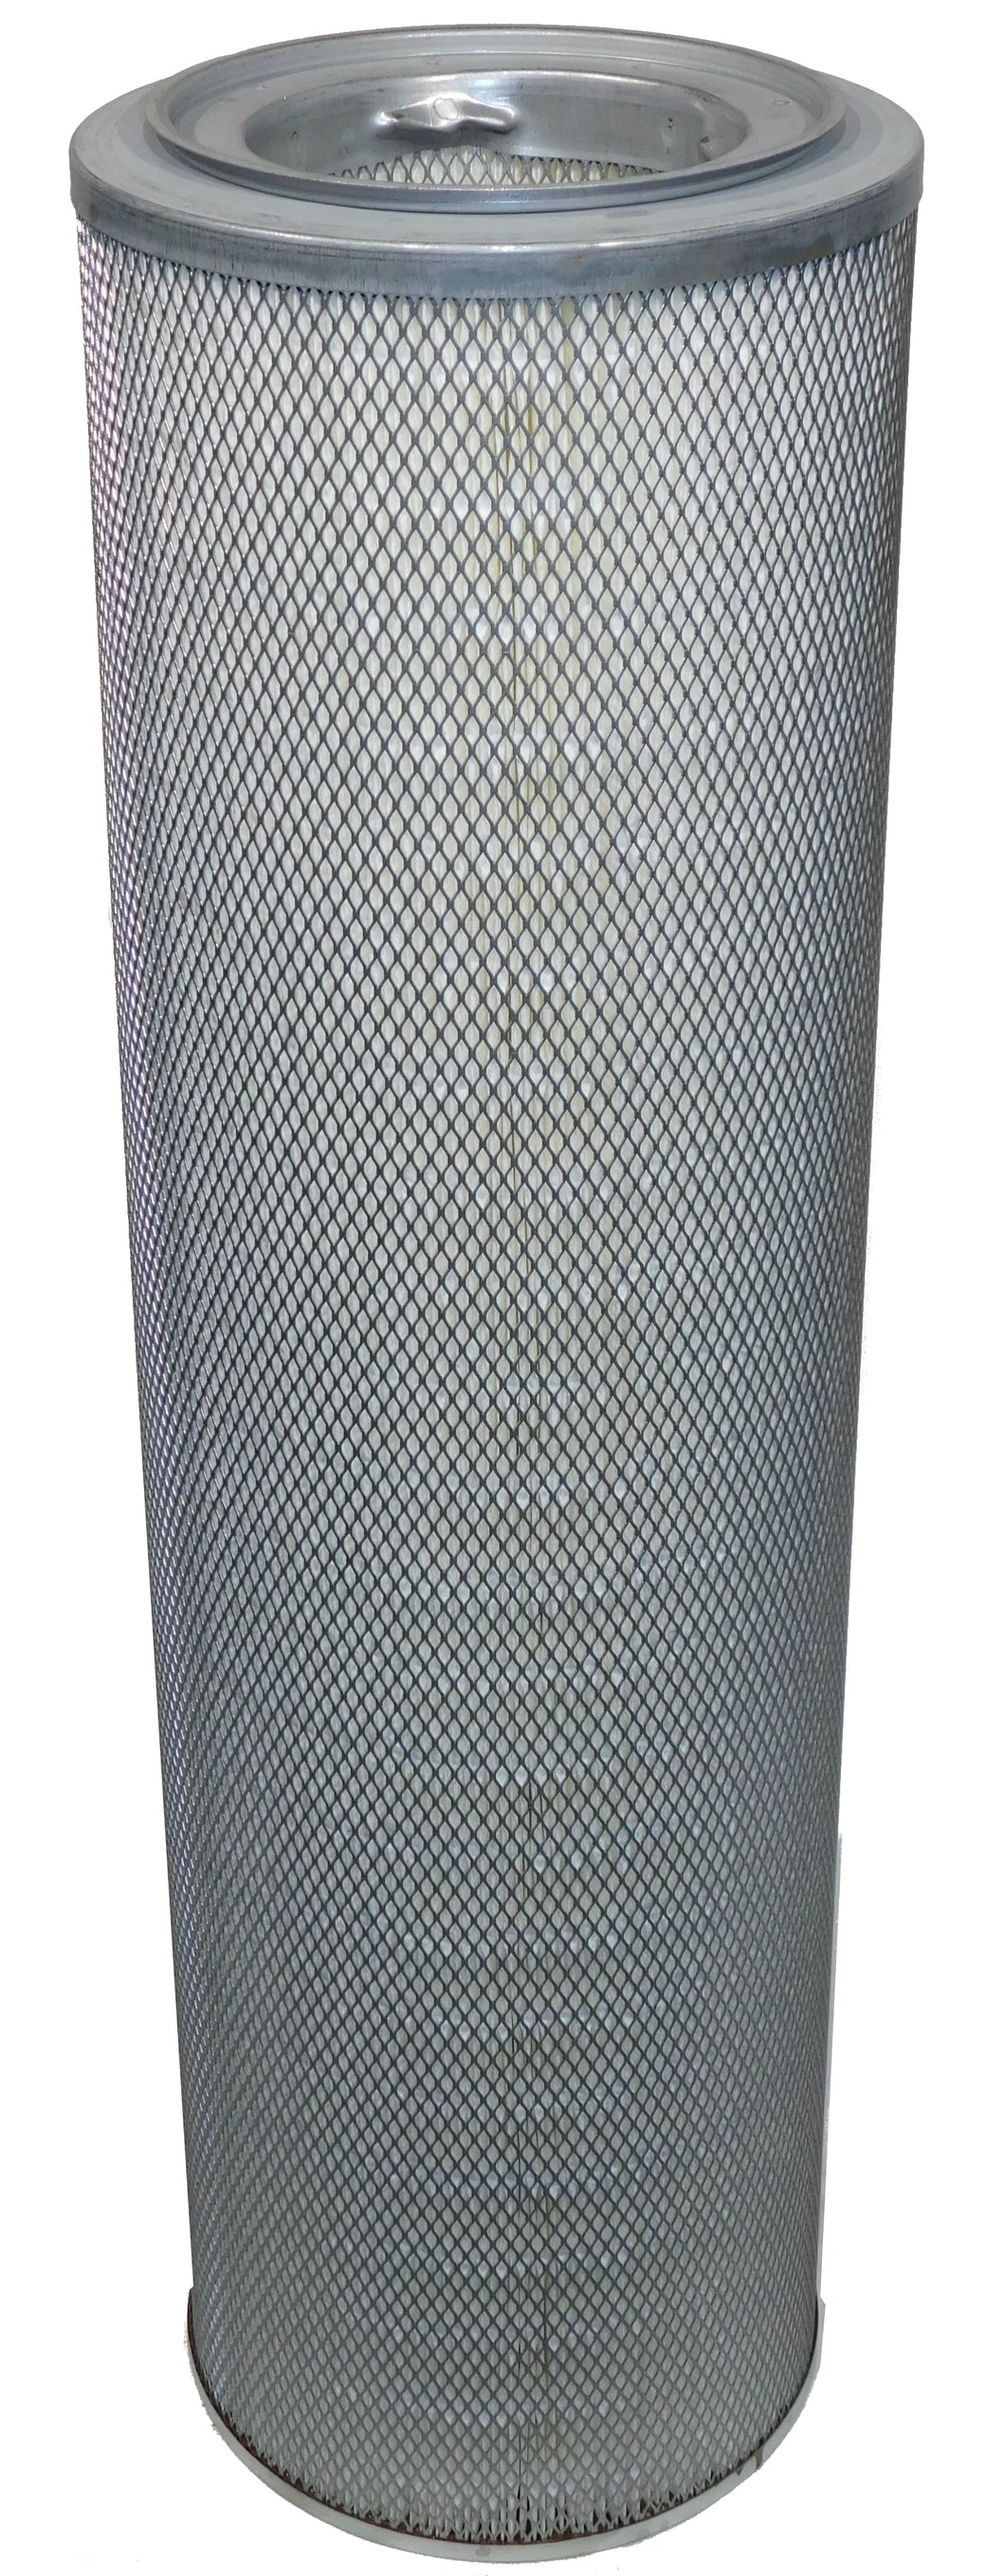 306658 - SLY - OEM Replacement Filter